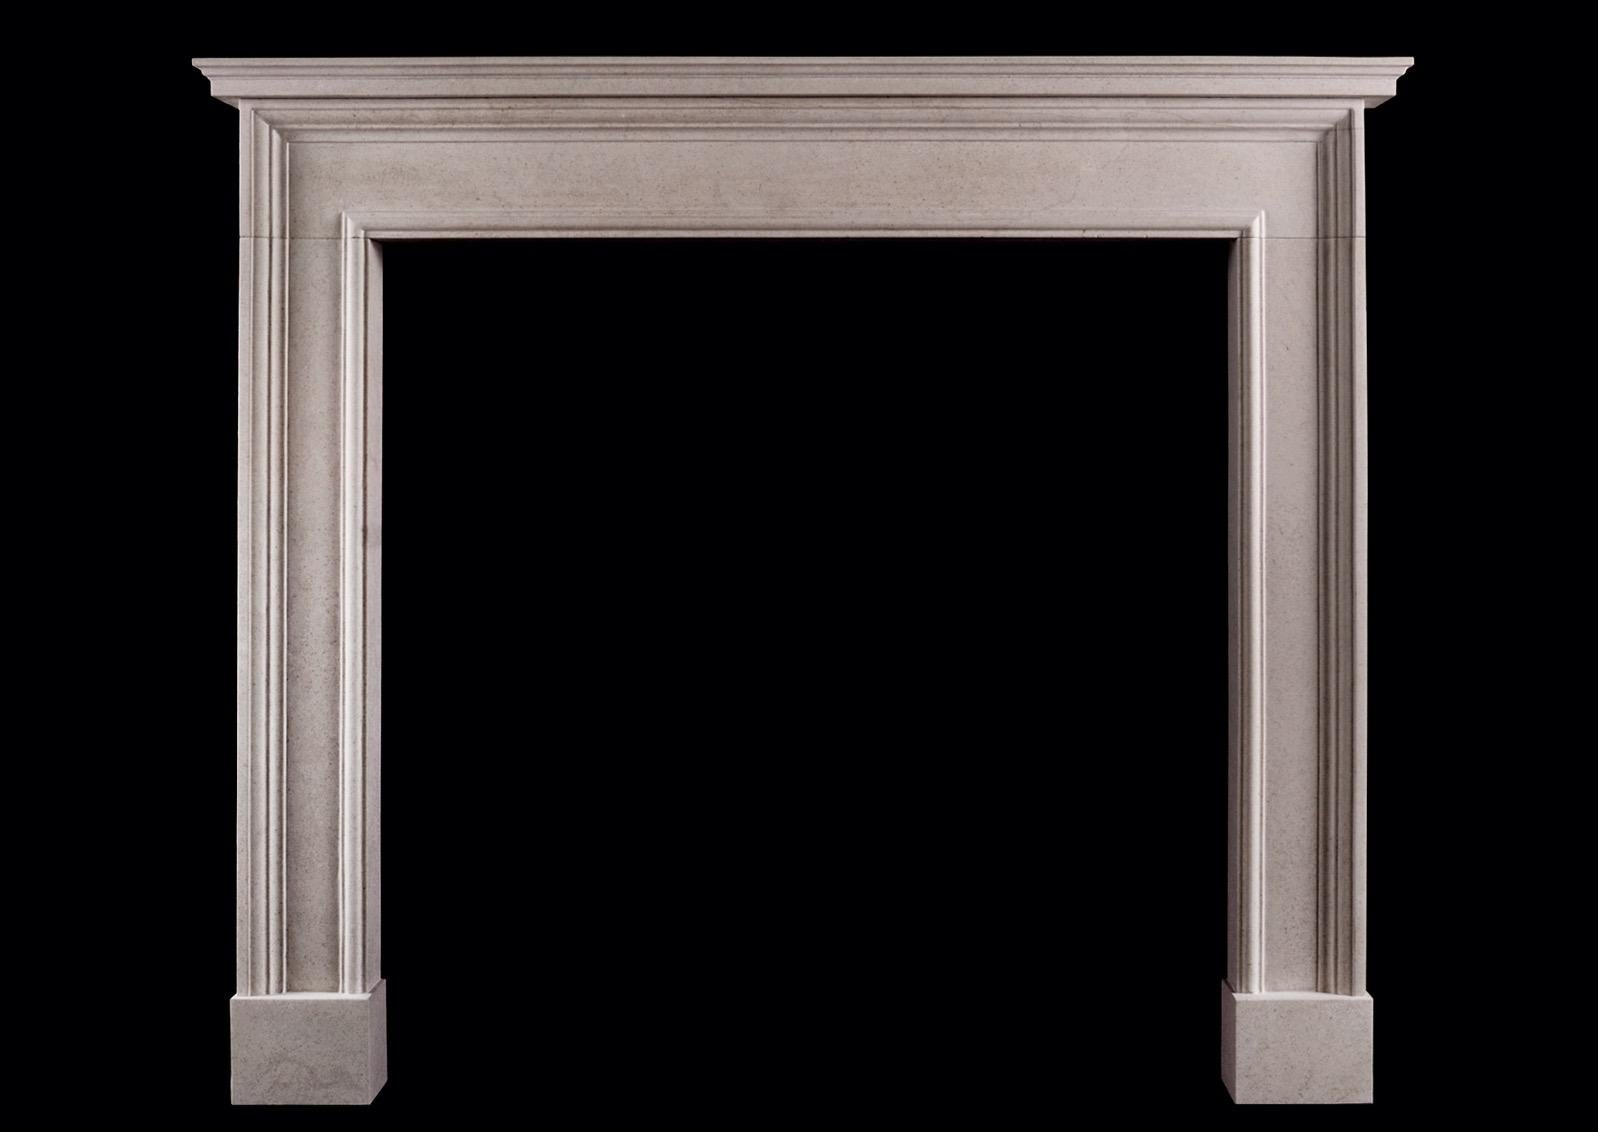 English Architectural Fireplace with Moulded Shelf For Sale